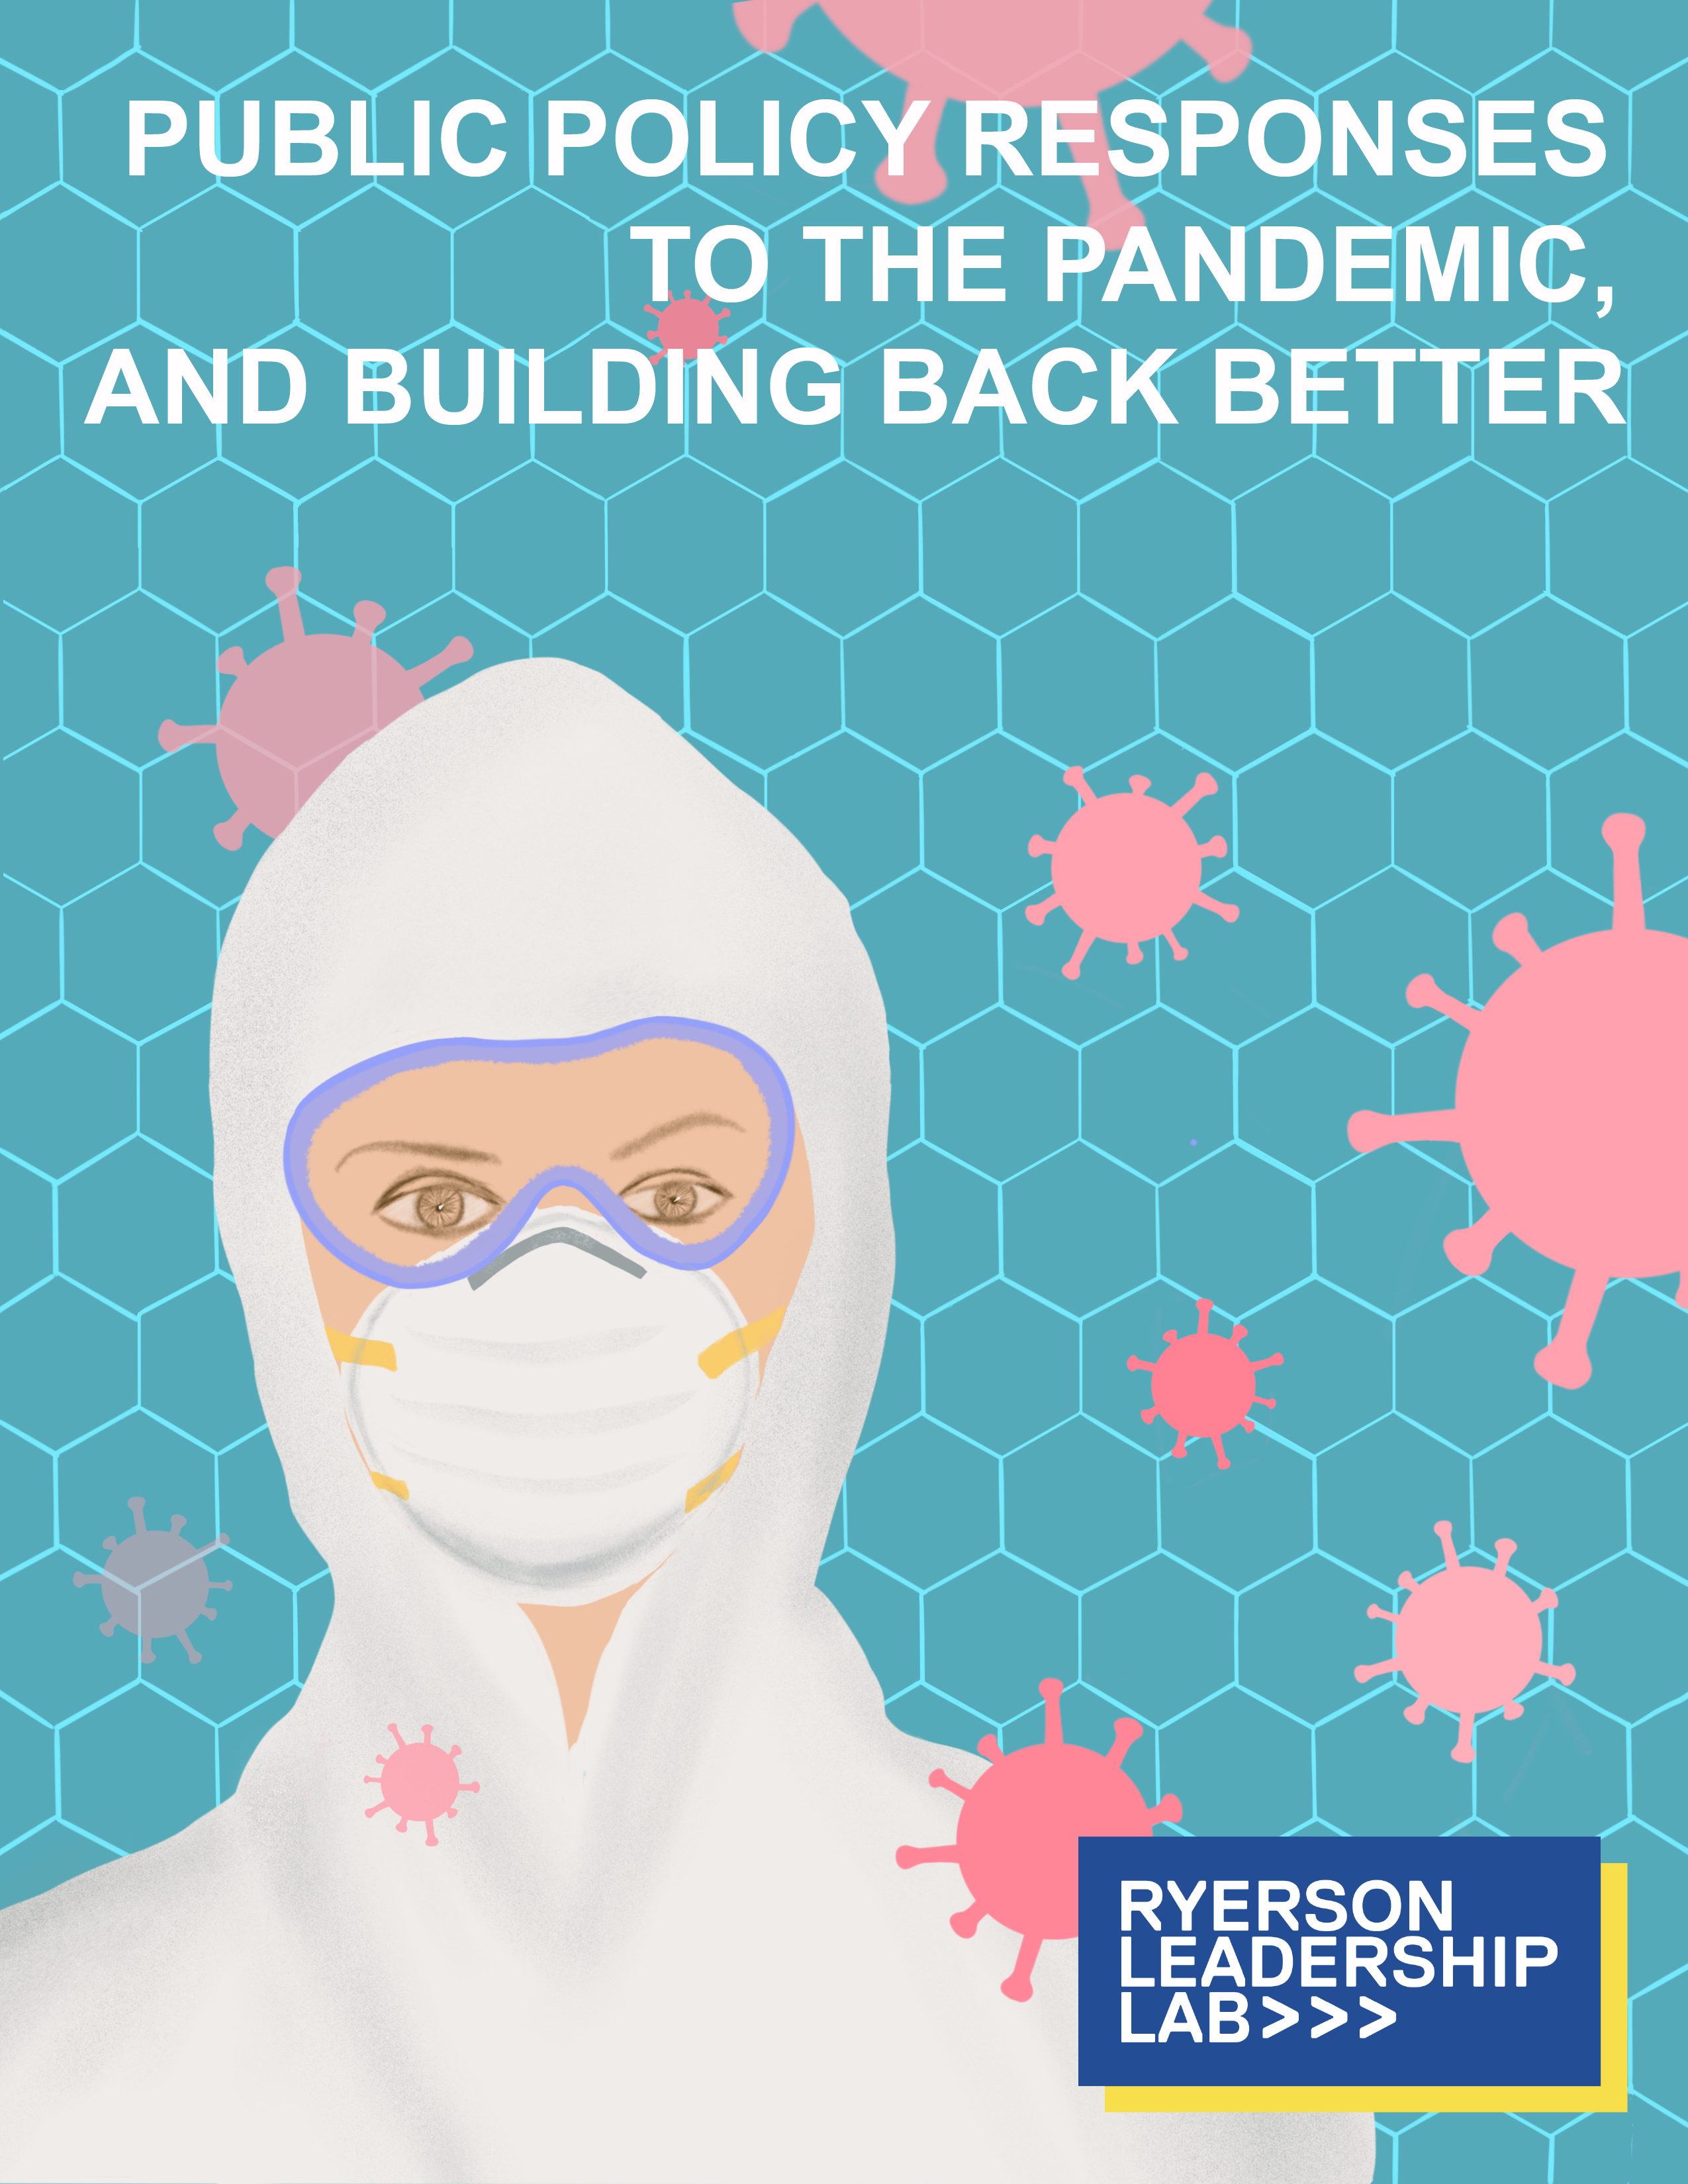 Cover illustration for the book titled "Public Policy Responses to the Pandemic, and Building Back Better." Illustration includes a woman wearing a white mask and white hazardous materials suit with COVID particles surrounding her